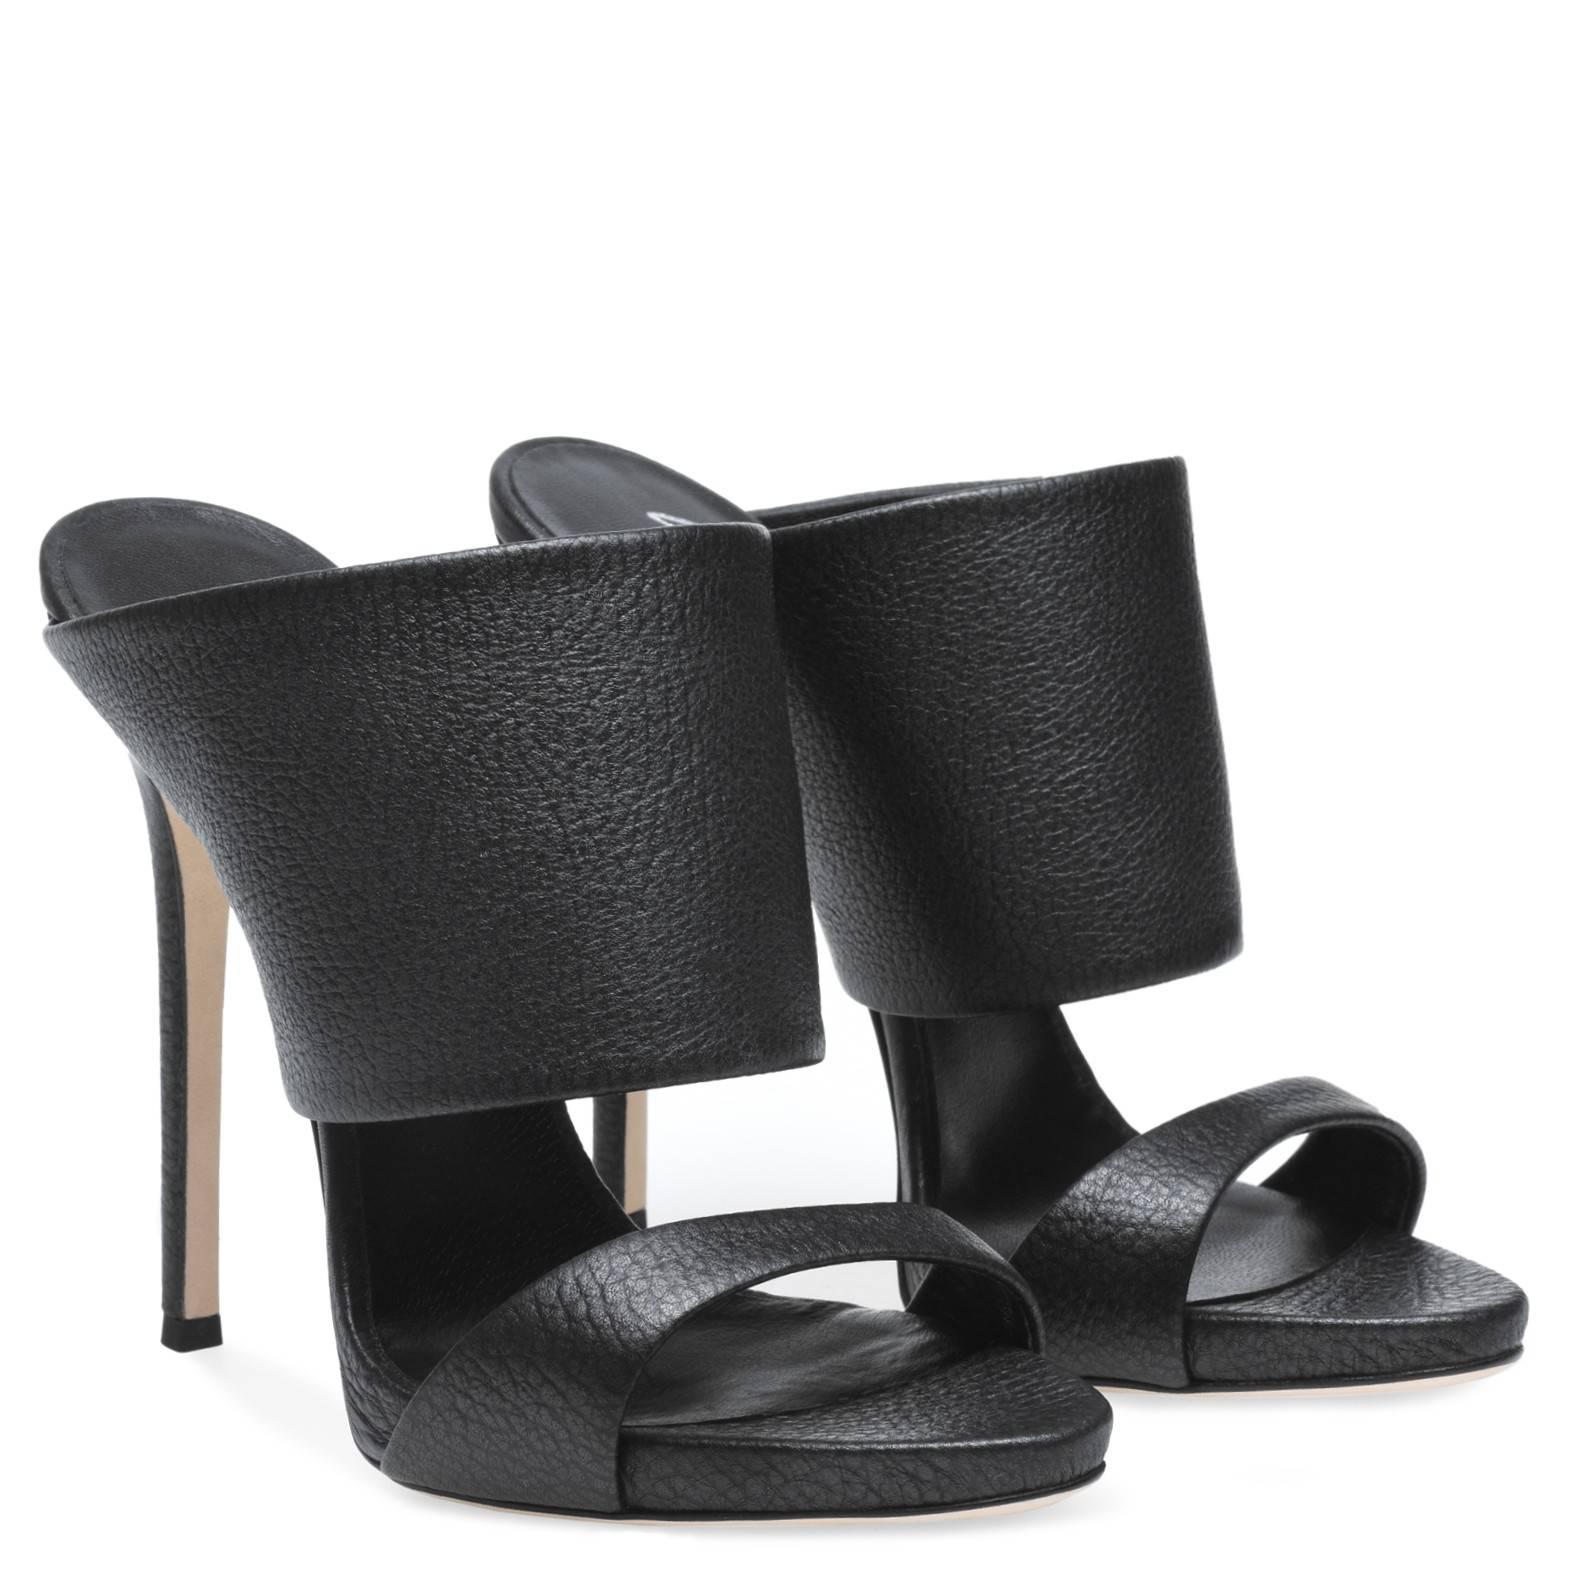 Giuseppe Zanotti New Black Leather Slide In Mules Evening Heels in Box

Size IT 36
Satin
Slide in 
Made in Italy
Heel height 4.75